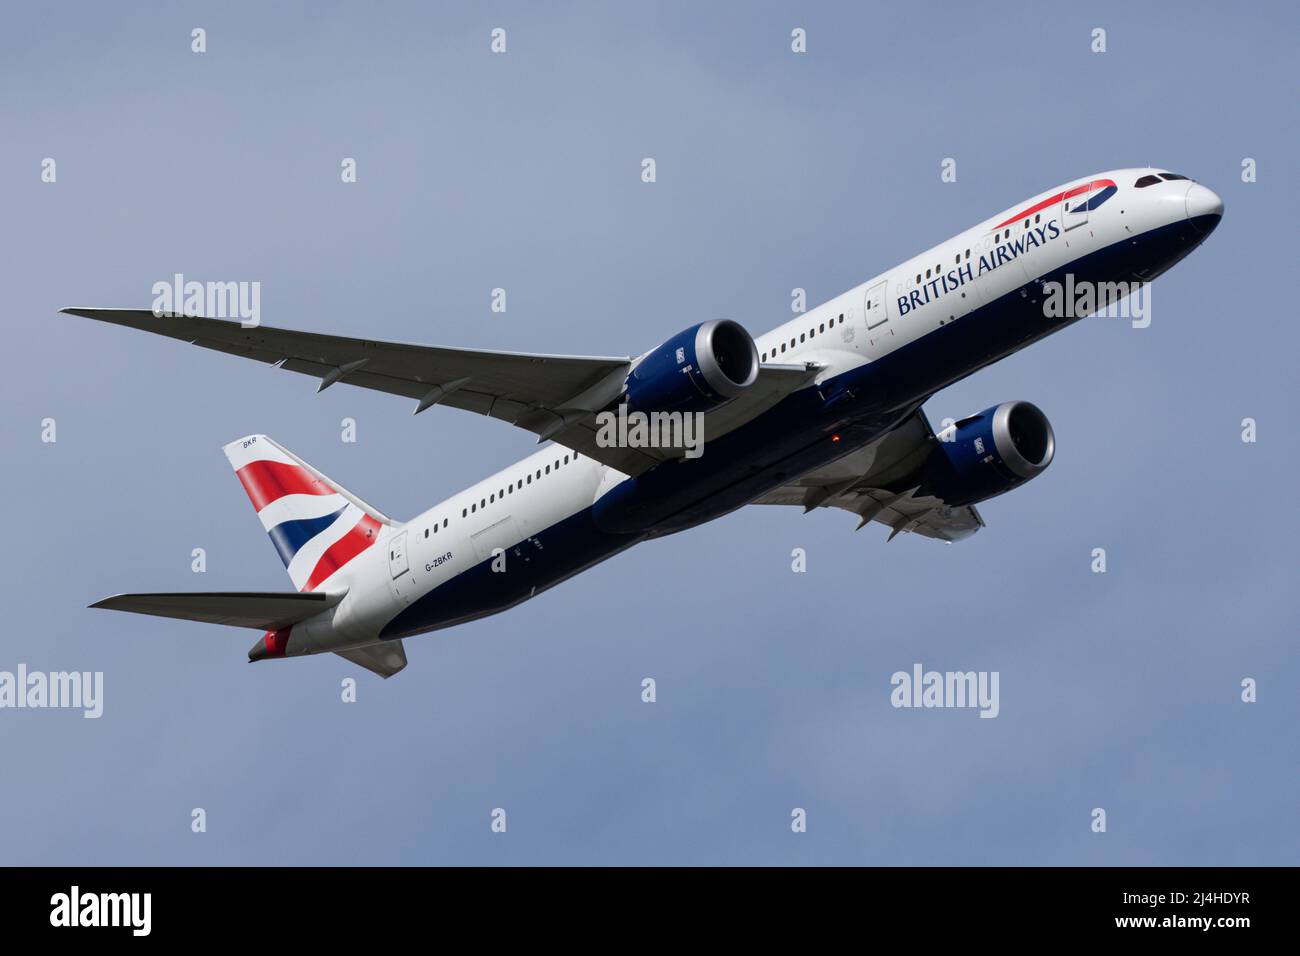 A Boeing 787 operated by British Airways departs from London Heathrow Airport Stock Photo